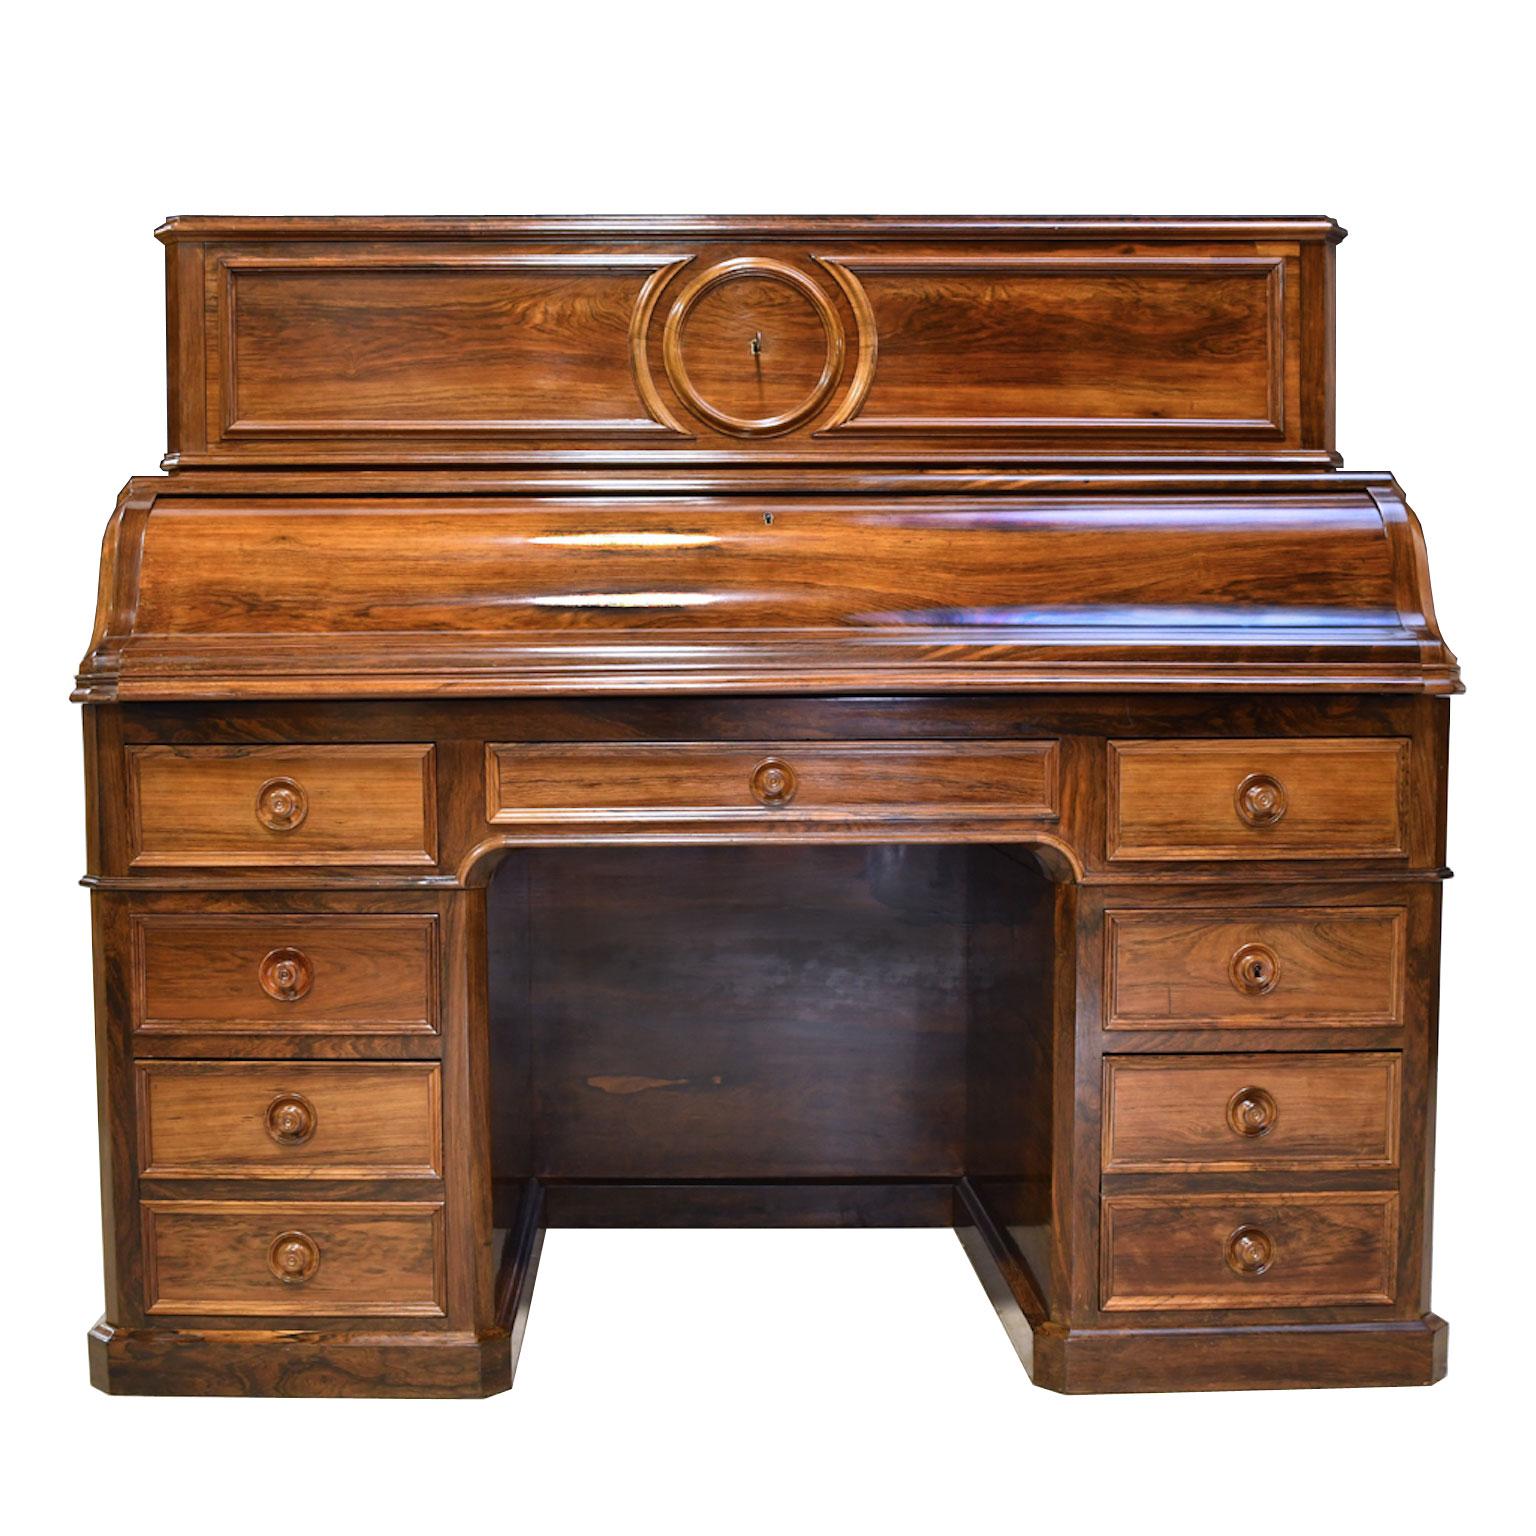 19th Century French Napoleon III Rosewood Pedestal Desk with Pull Out Secretary, circa 1865 For Sale